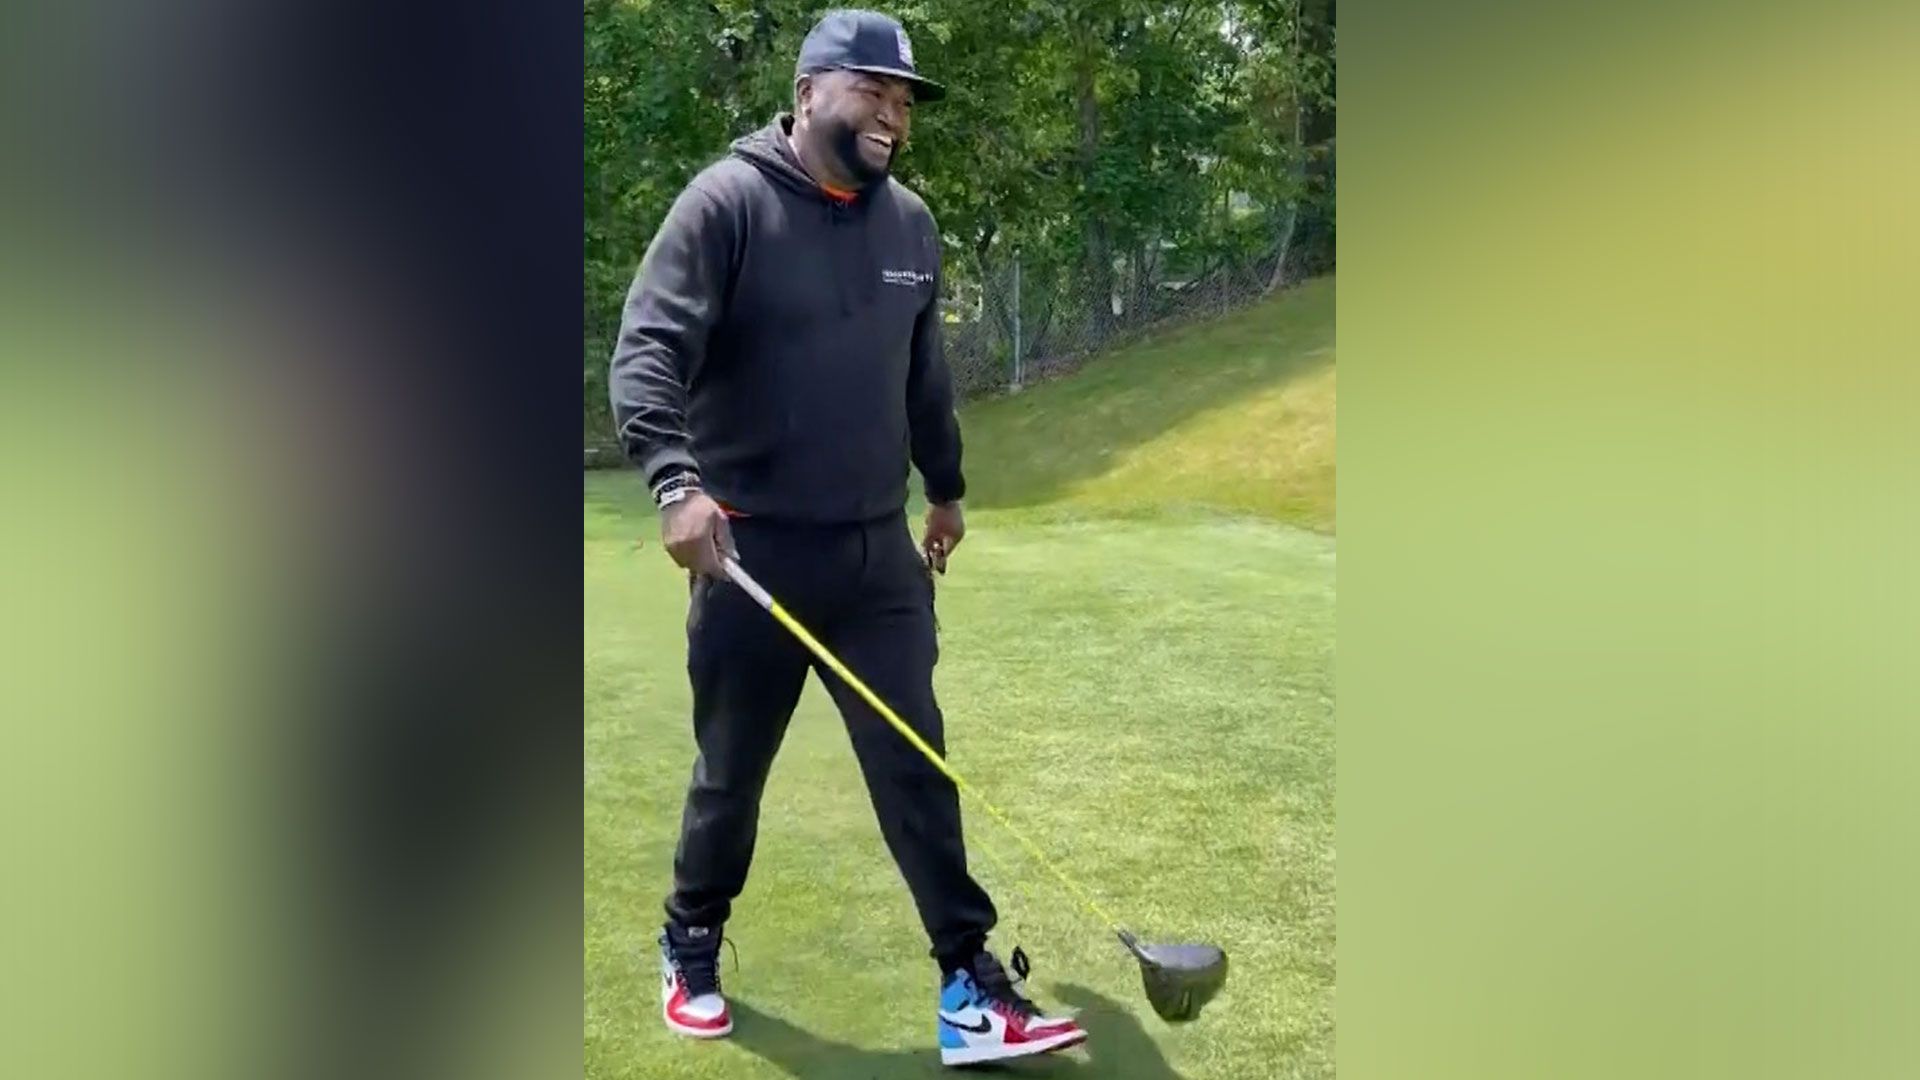 David Ortiz: How to Swing for the Fences – Clinton Foundation